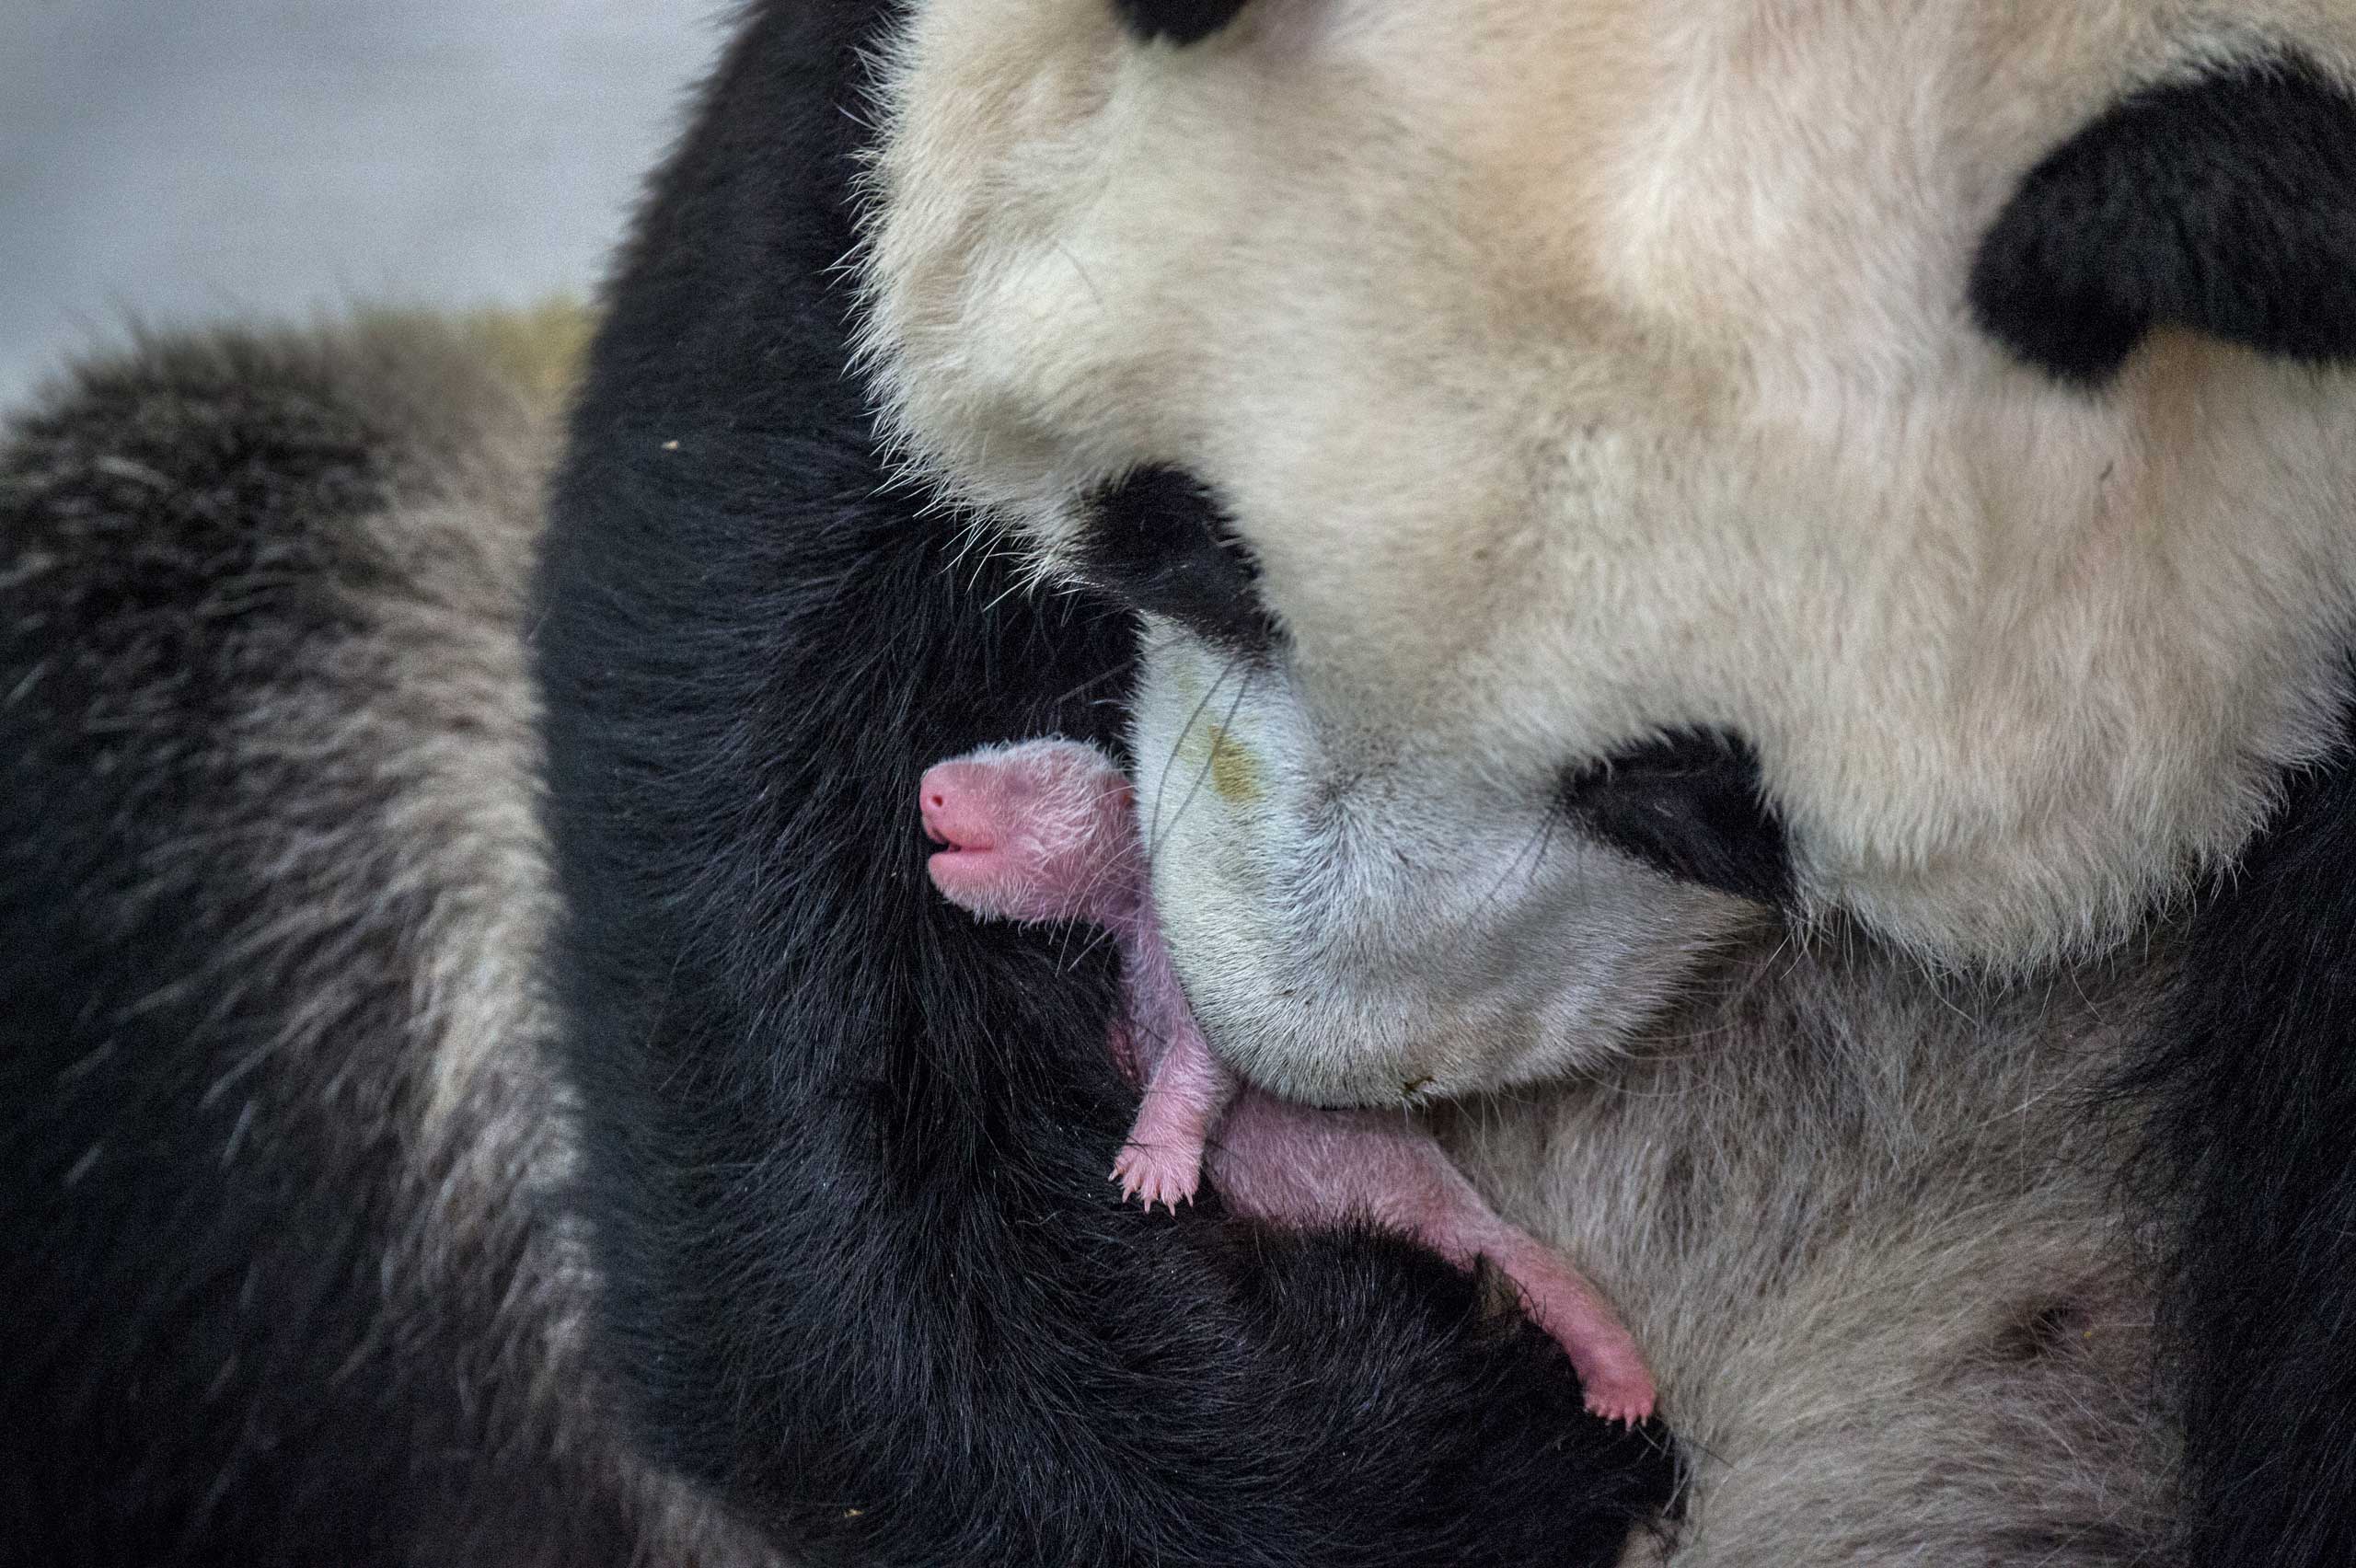 Seven-year-old giant panda Min Min had a baby girl at Bifengxia Giant Panda Breeding and Research Center in Sichuan Province, China.